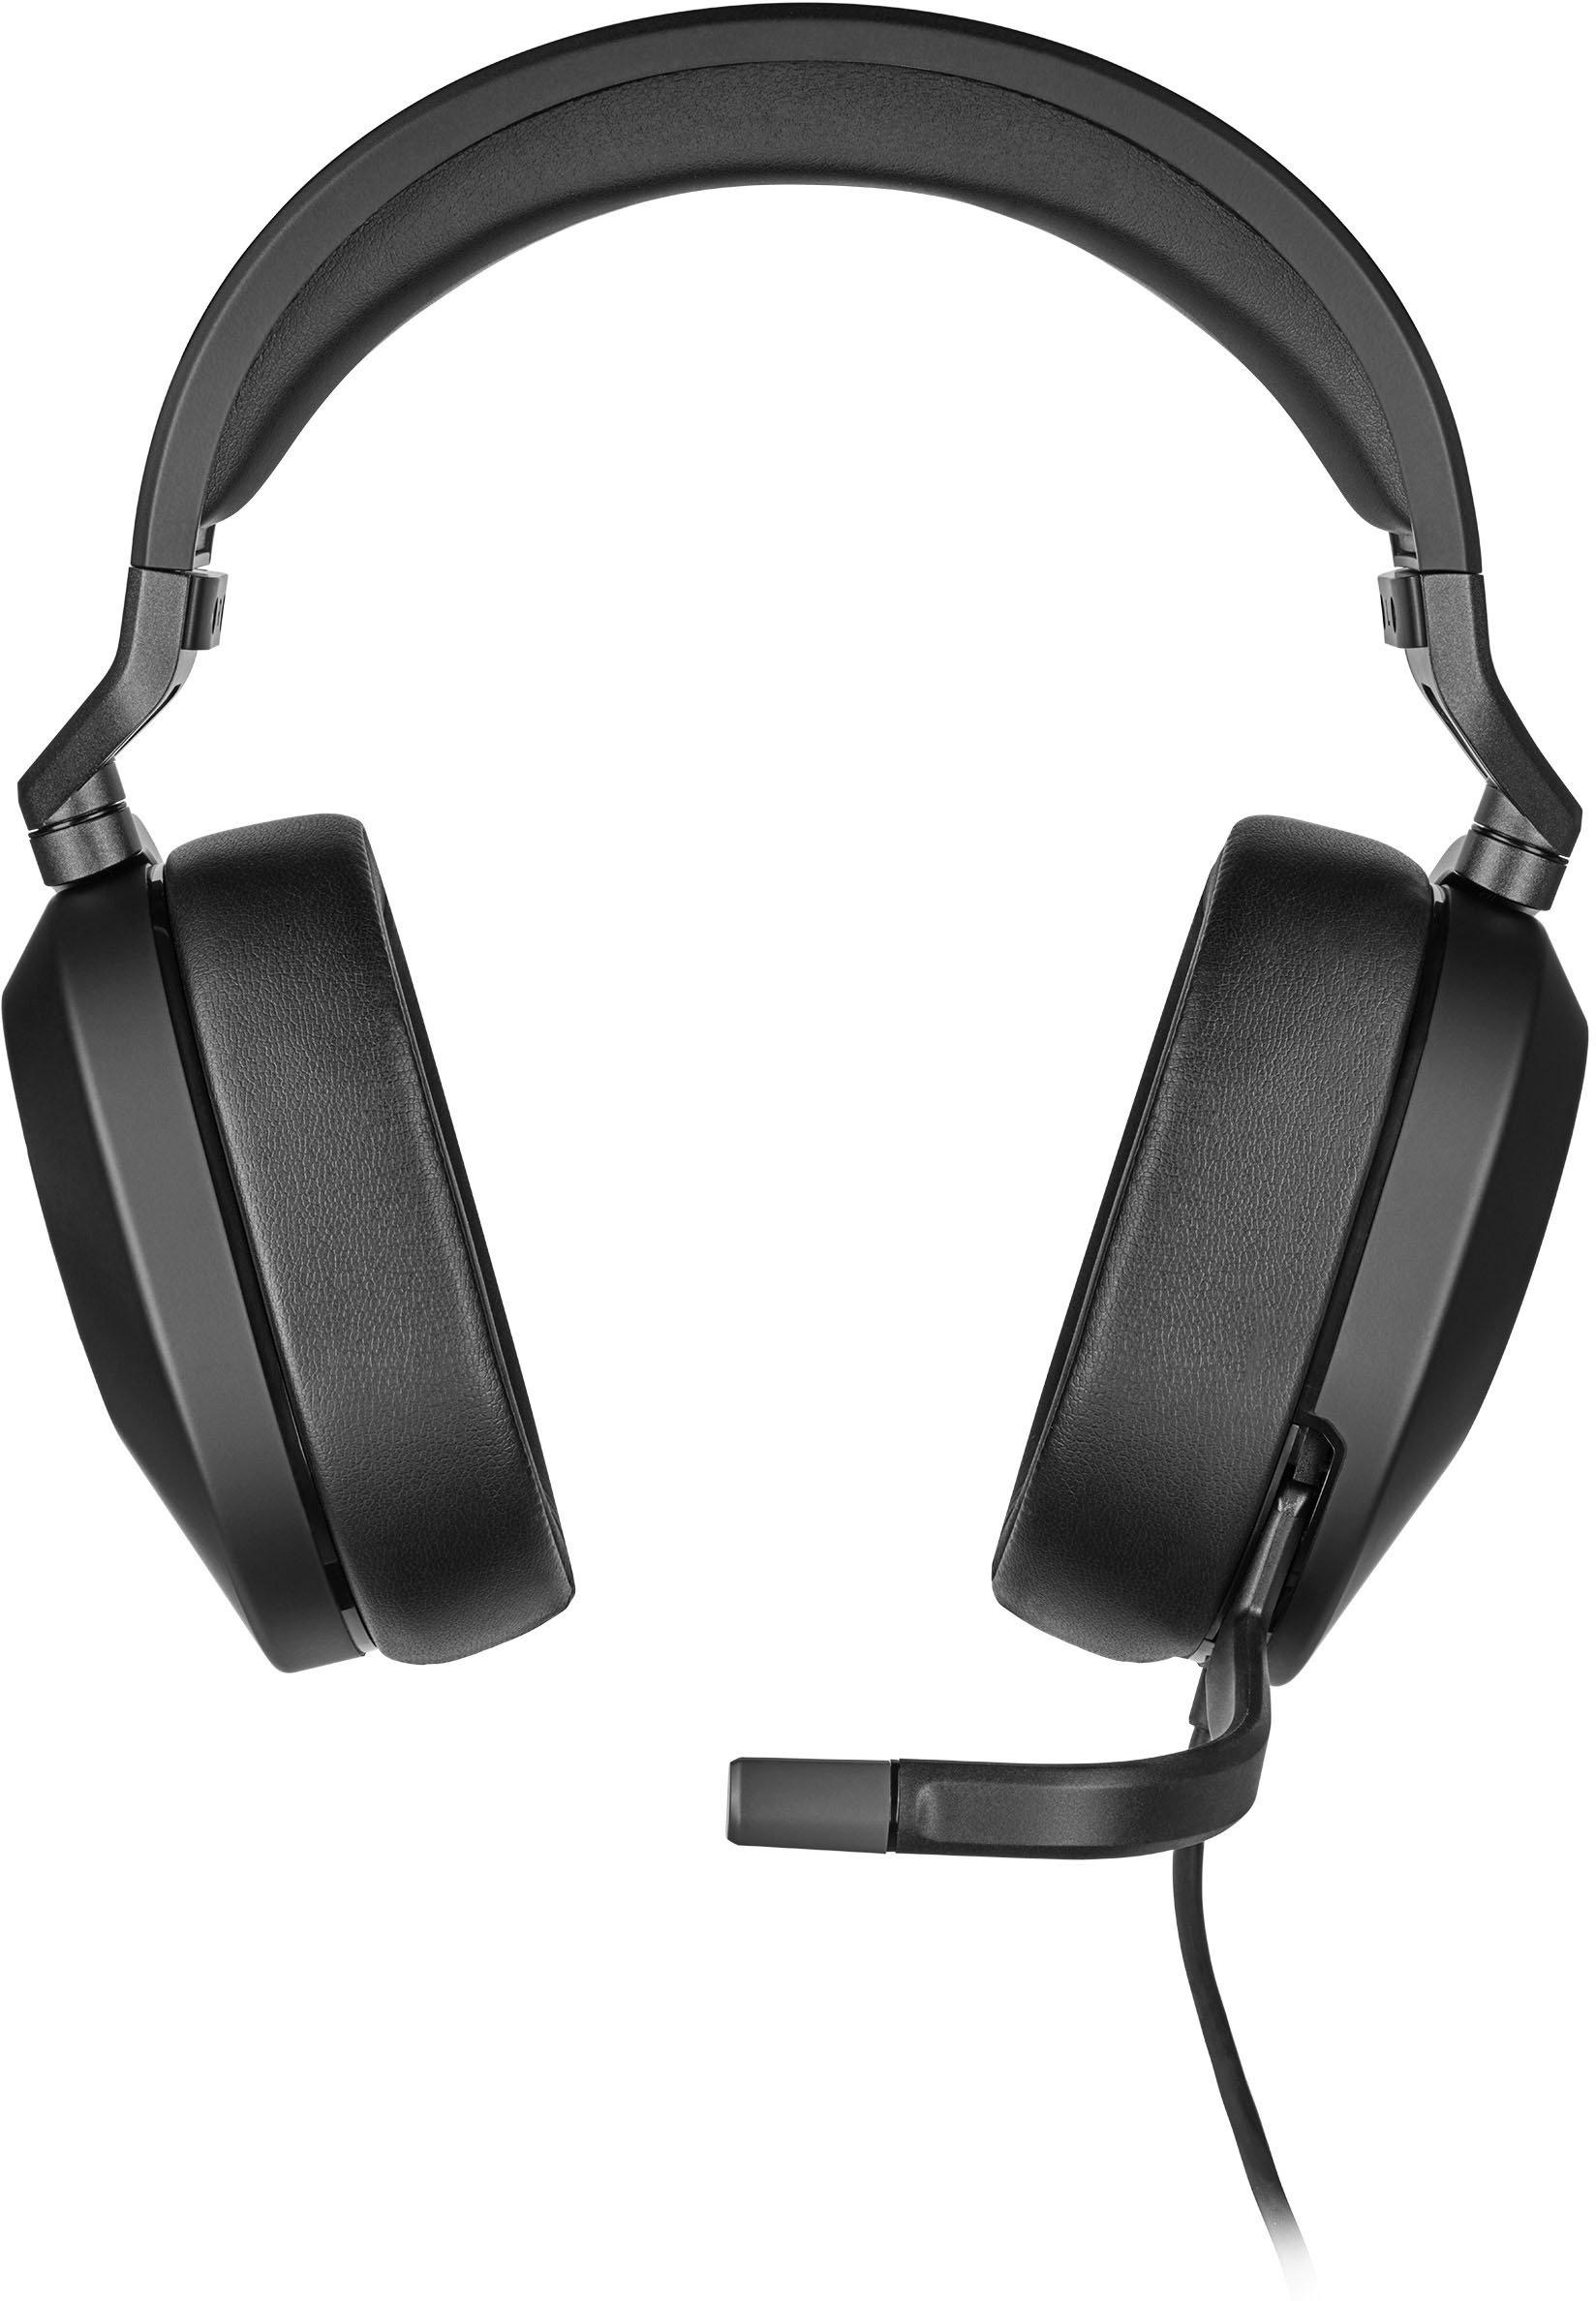 CORSAIR HS65 Surround Carbon Wired 7.1 Gaming Headset for PC, PlayStation  5, and PlayStation 4